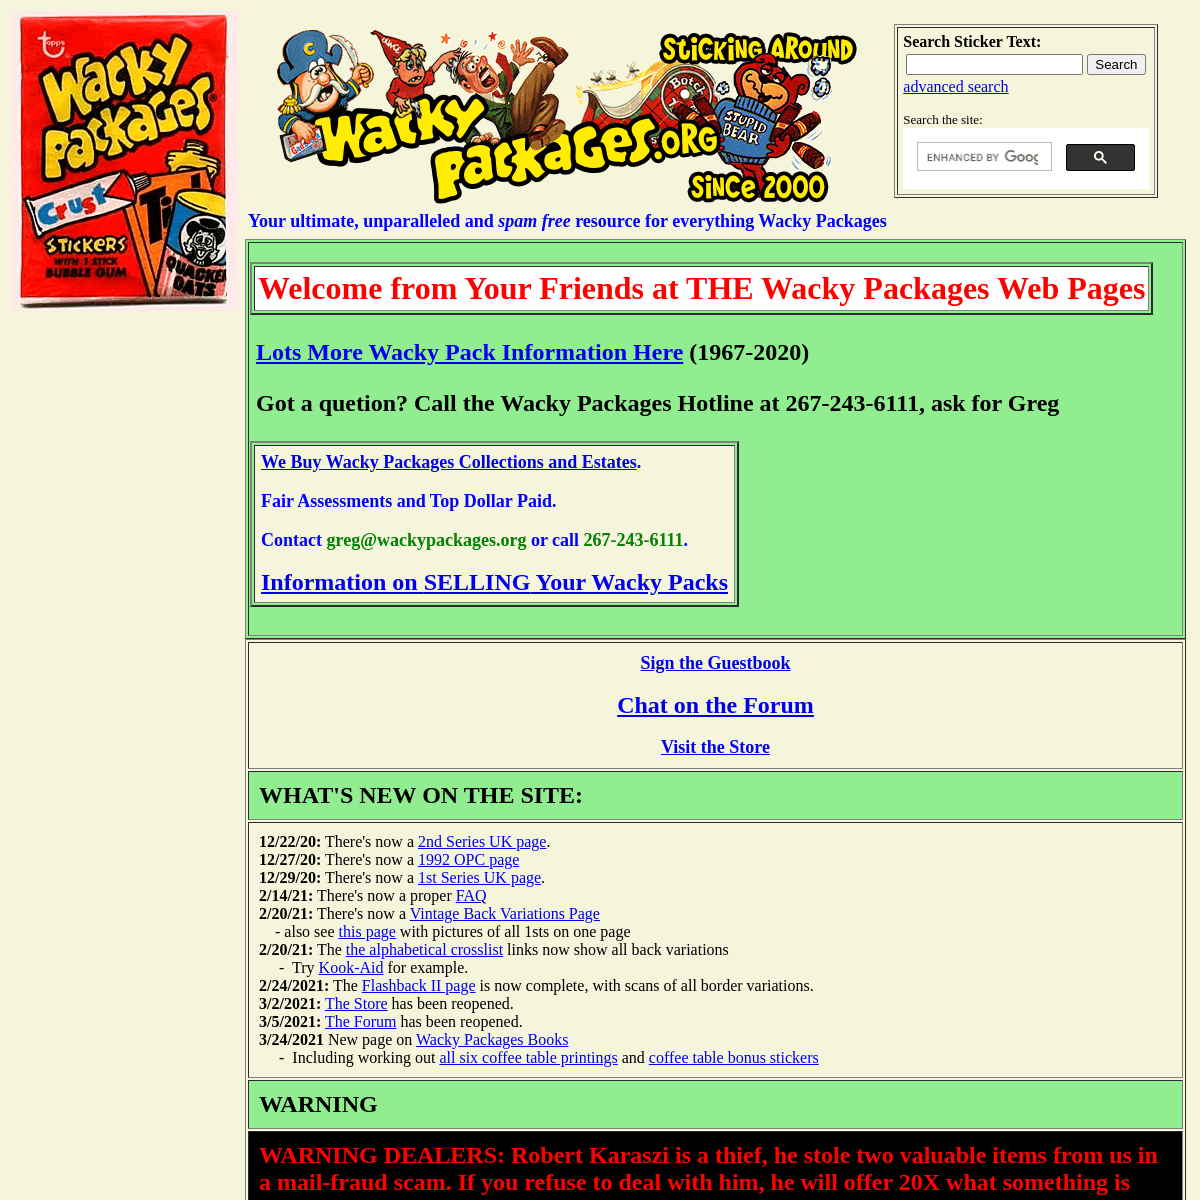 A complete backup of https://wackypackages.org